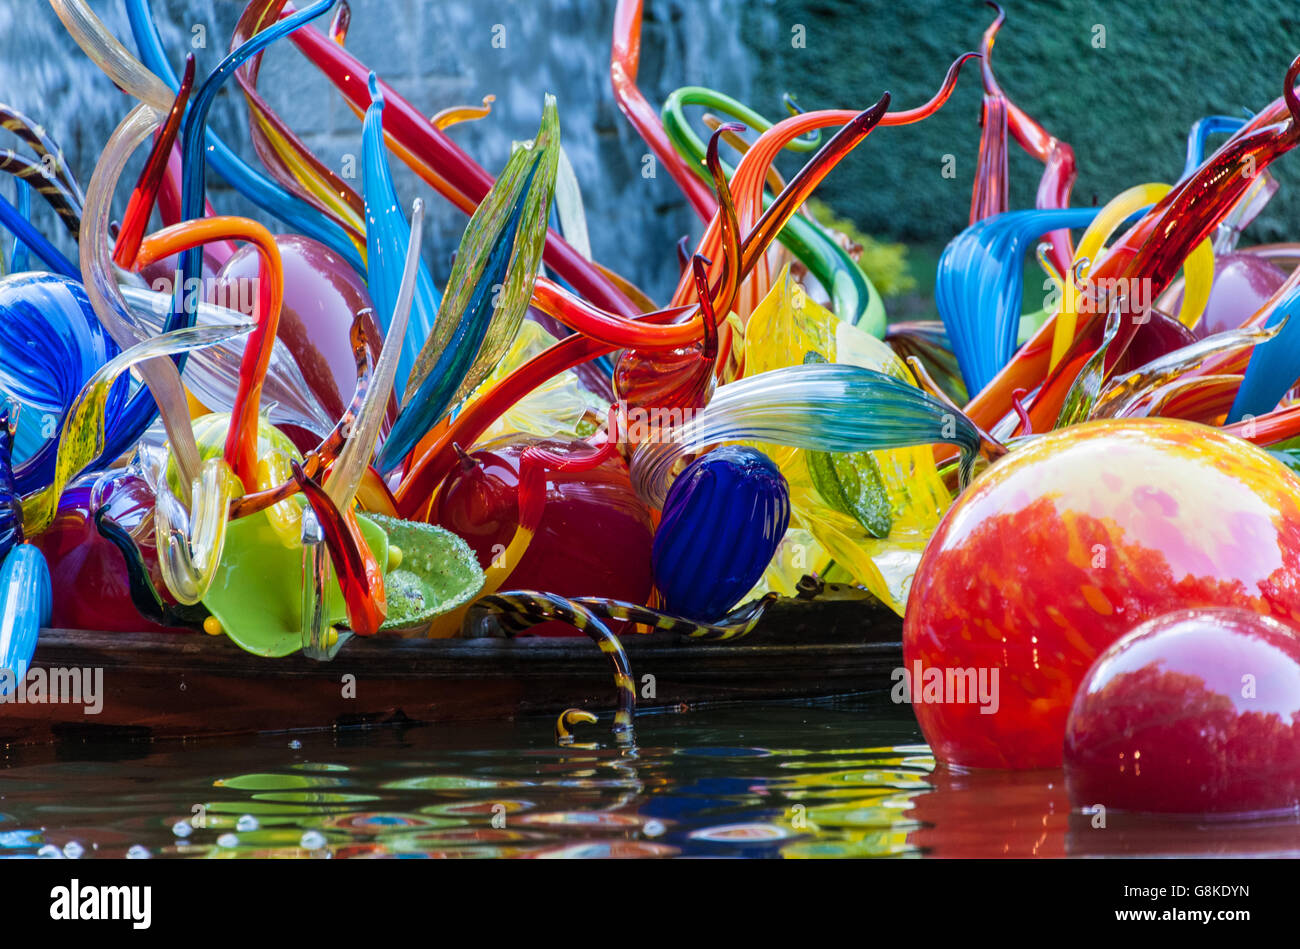 'Fiori Boat and Niijima Floats' glass sculpture by Dale Chihuly at Atlanta Botanical Garden's Chihuly in the Garden exhibit. Stock Photo